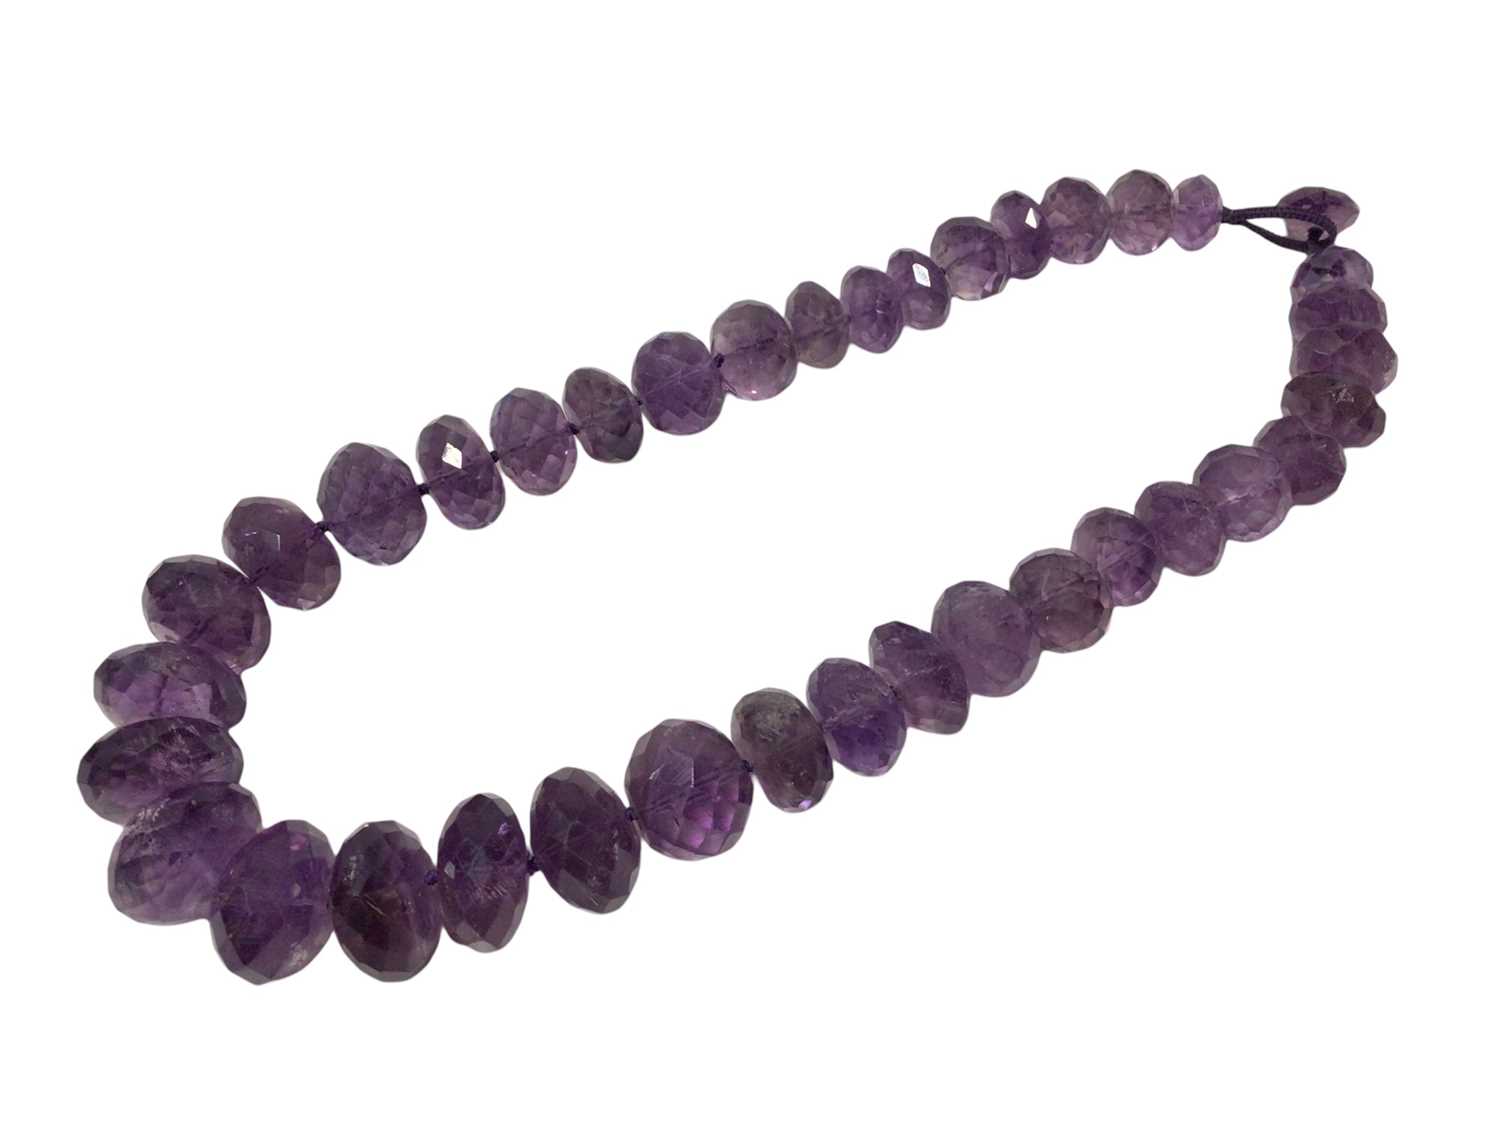 Amethyst bead necklace with a string of graduated faceted amethyst beads - Image 2 of 4